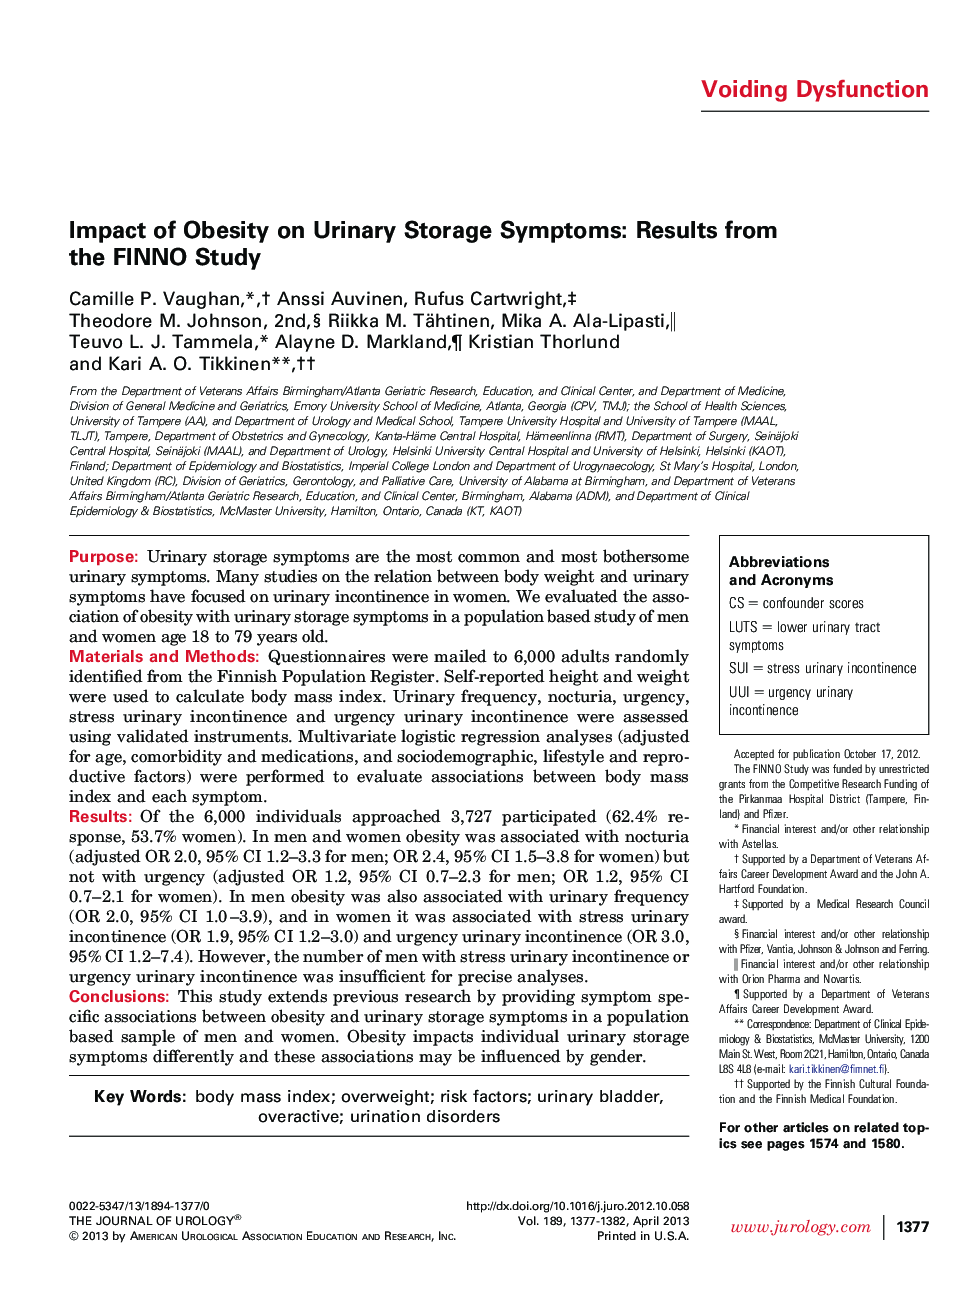 Impact of Obesity on Urinary Storage Symptoms: Results from the FINNO Study 